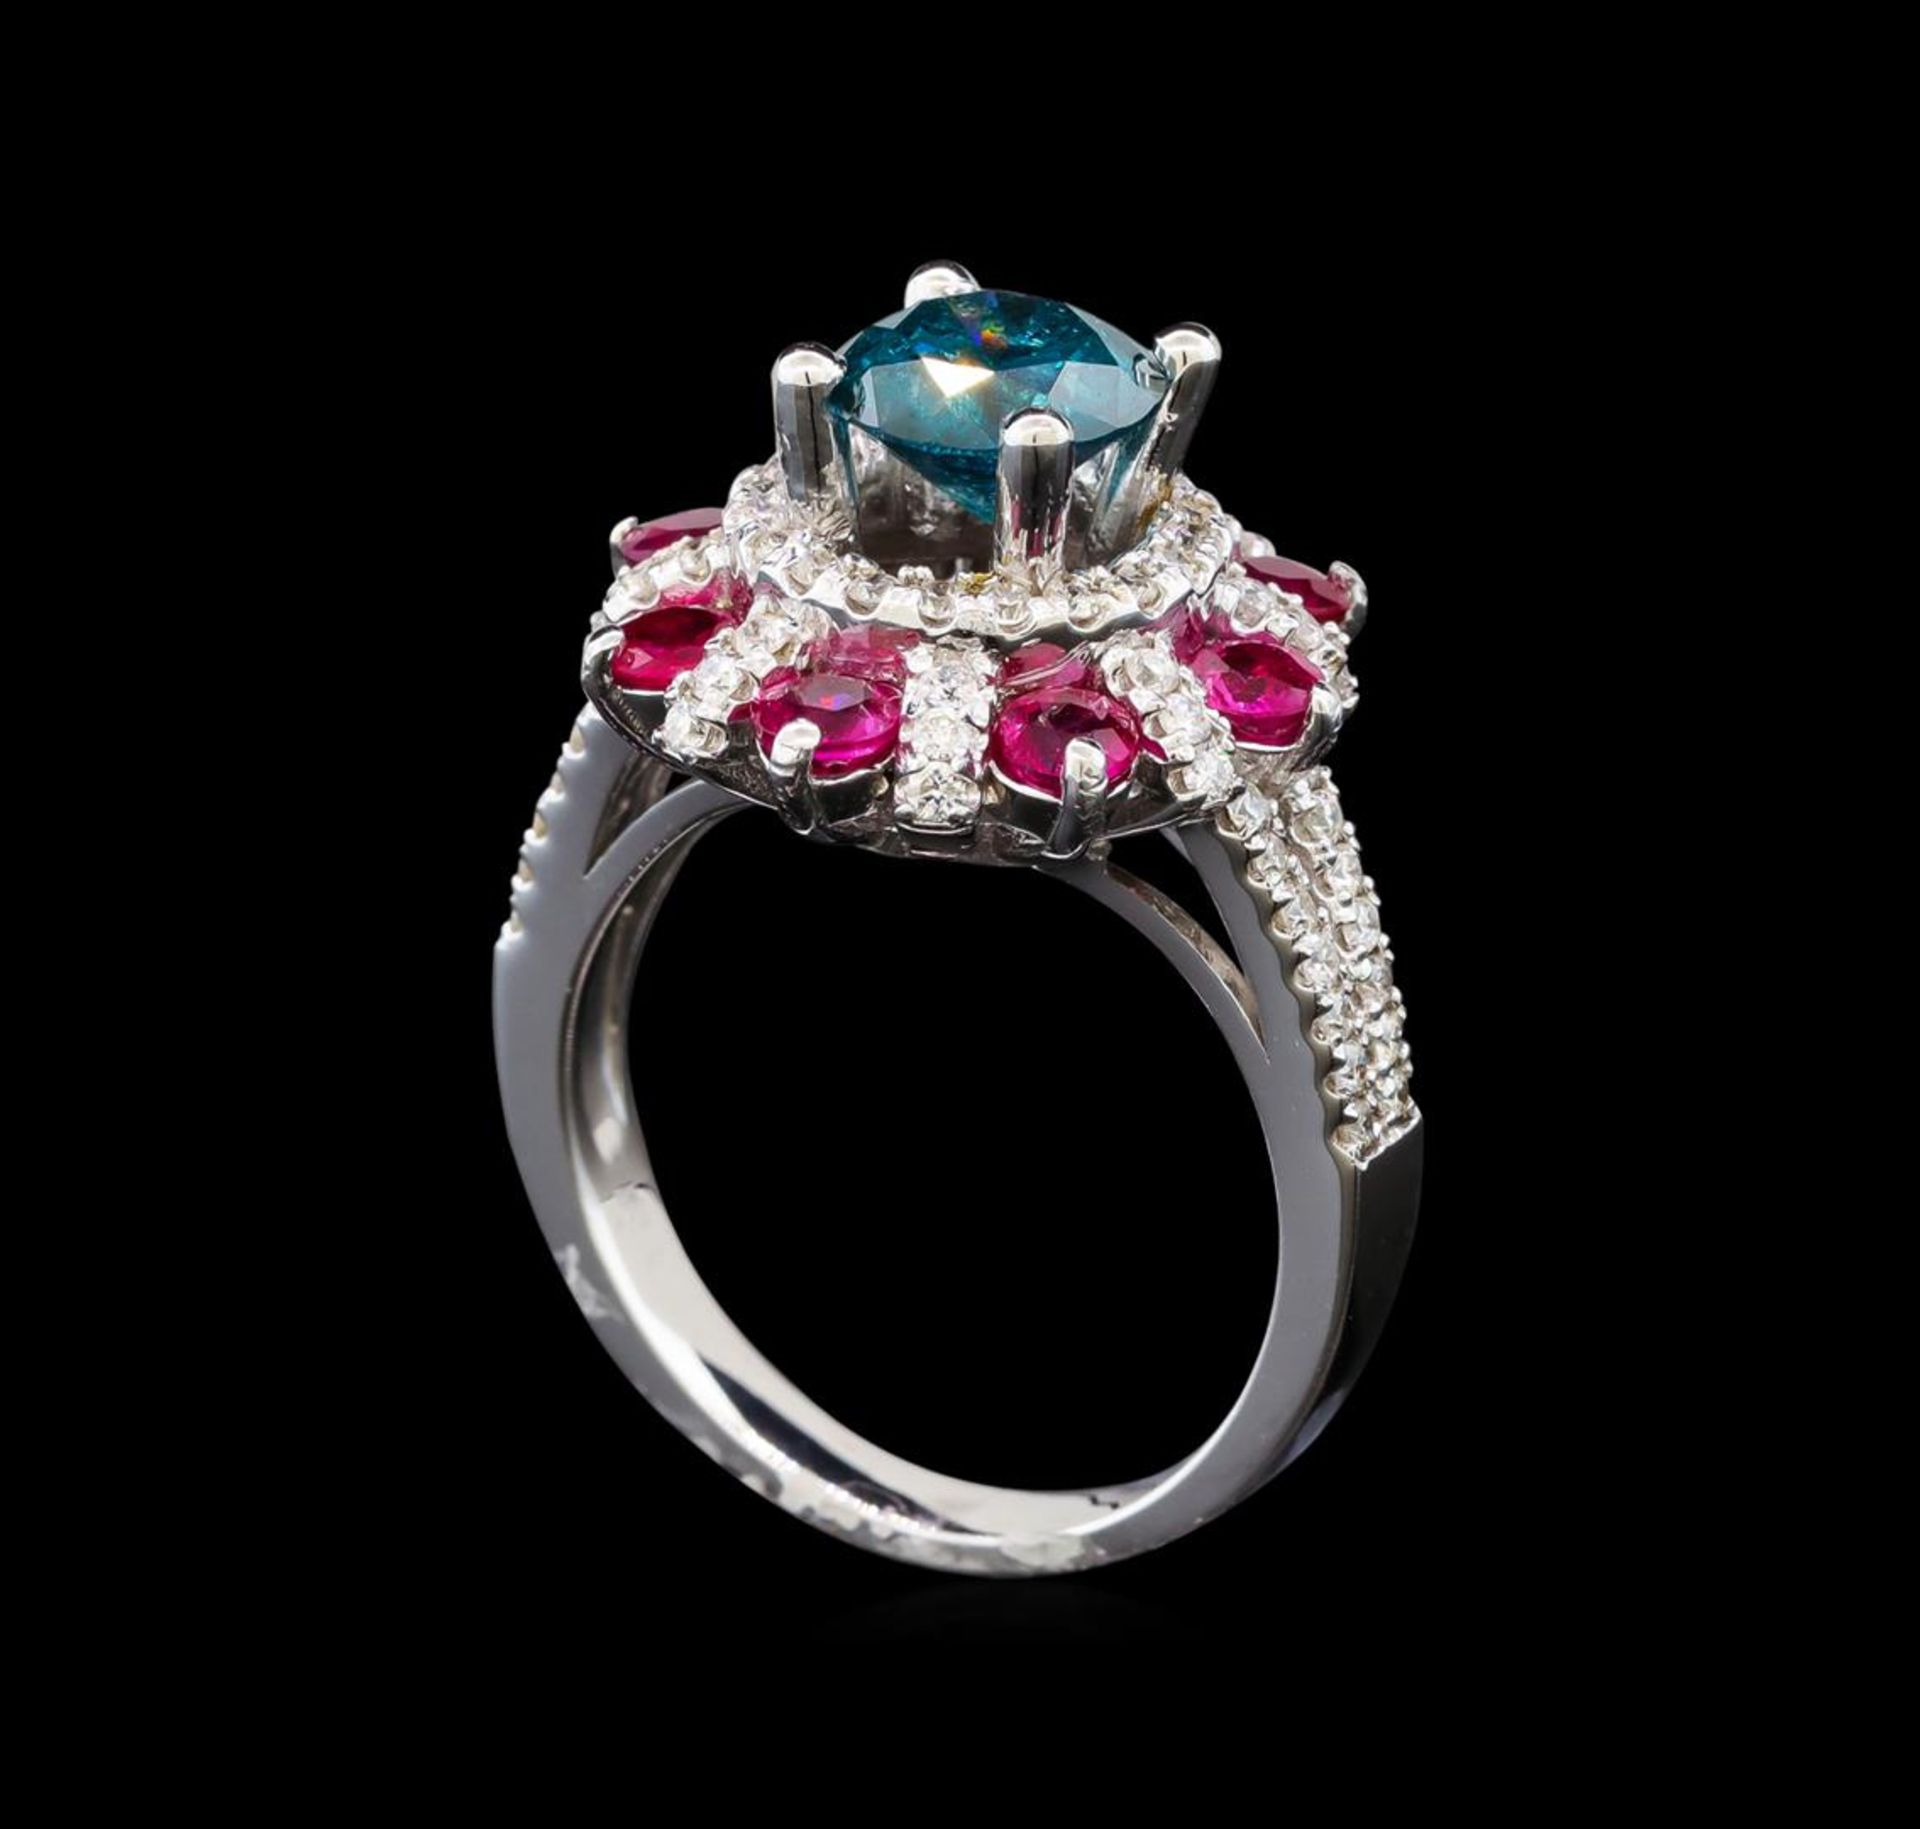 14KT White Gold 1.89 ctw Fancy Blue Diamond and Ruby Ring - Image 4 of 5